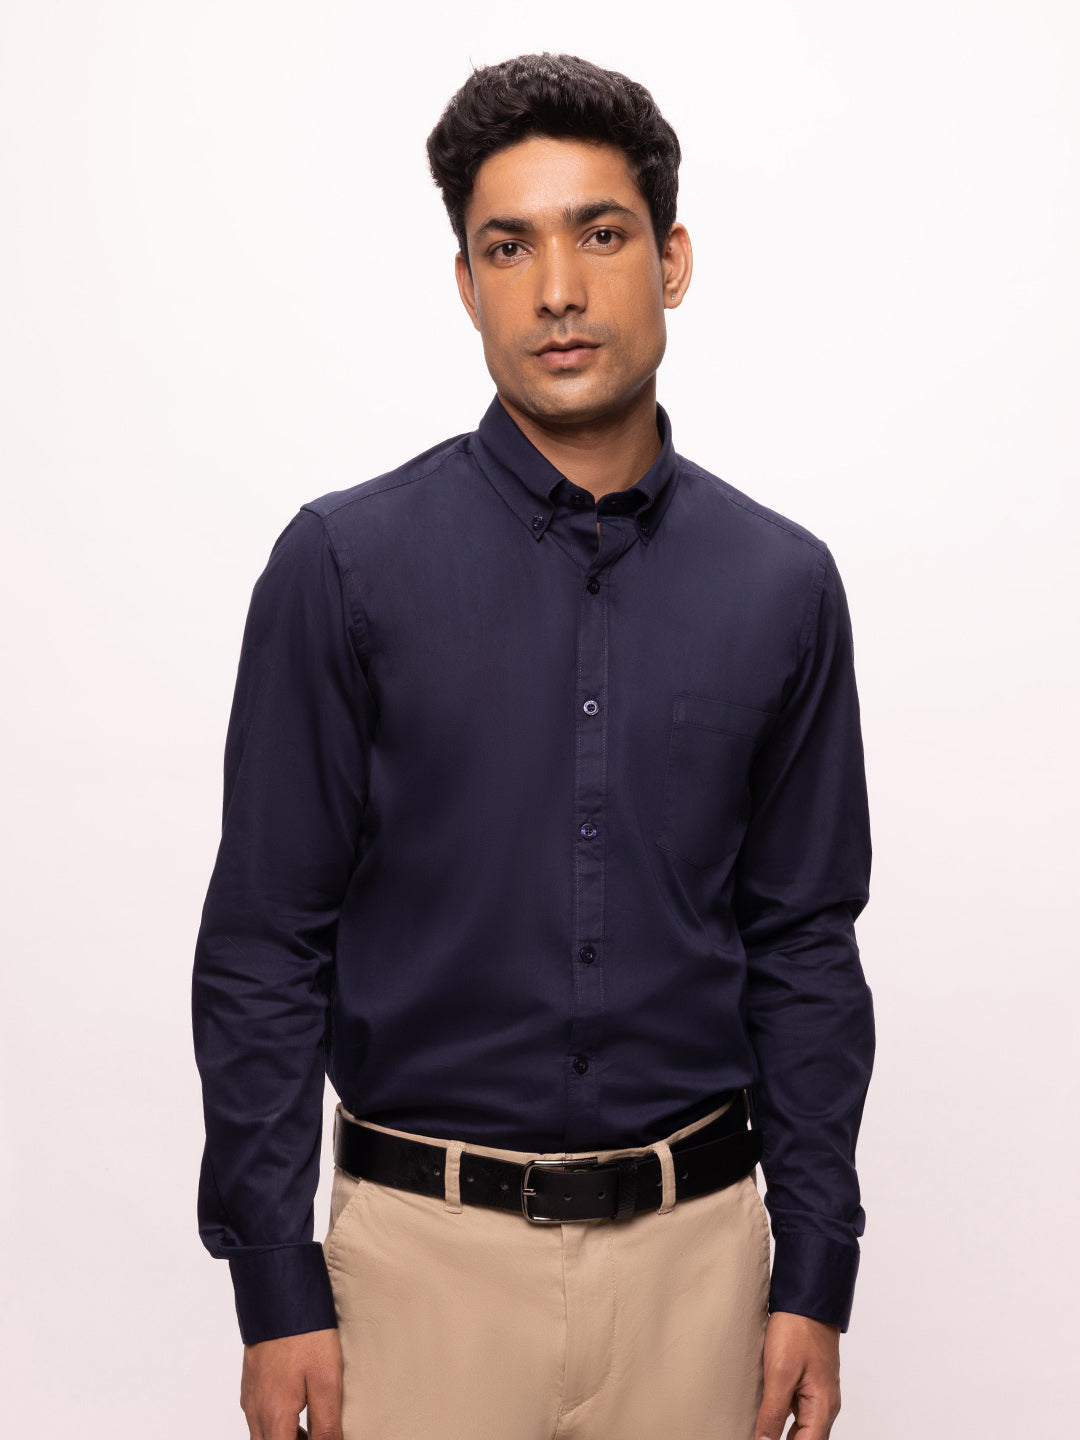 Bombay High Men's Solid Prussian Blue Shirt